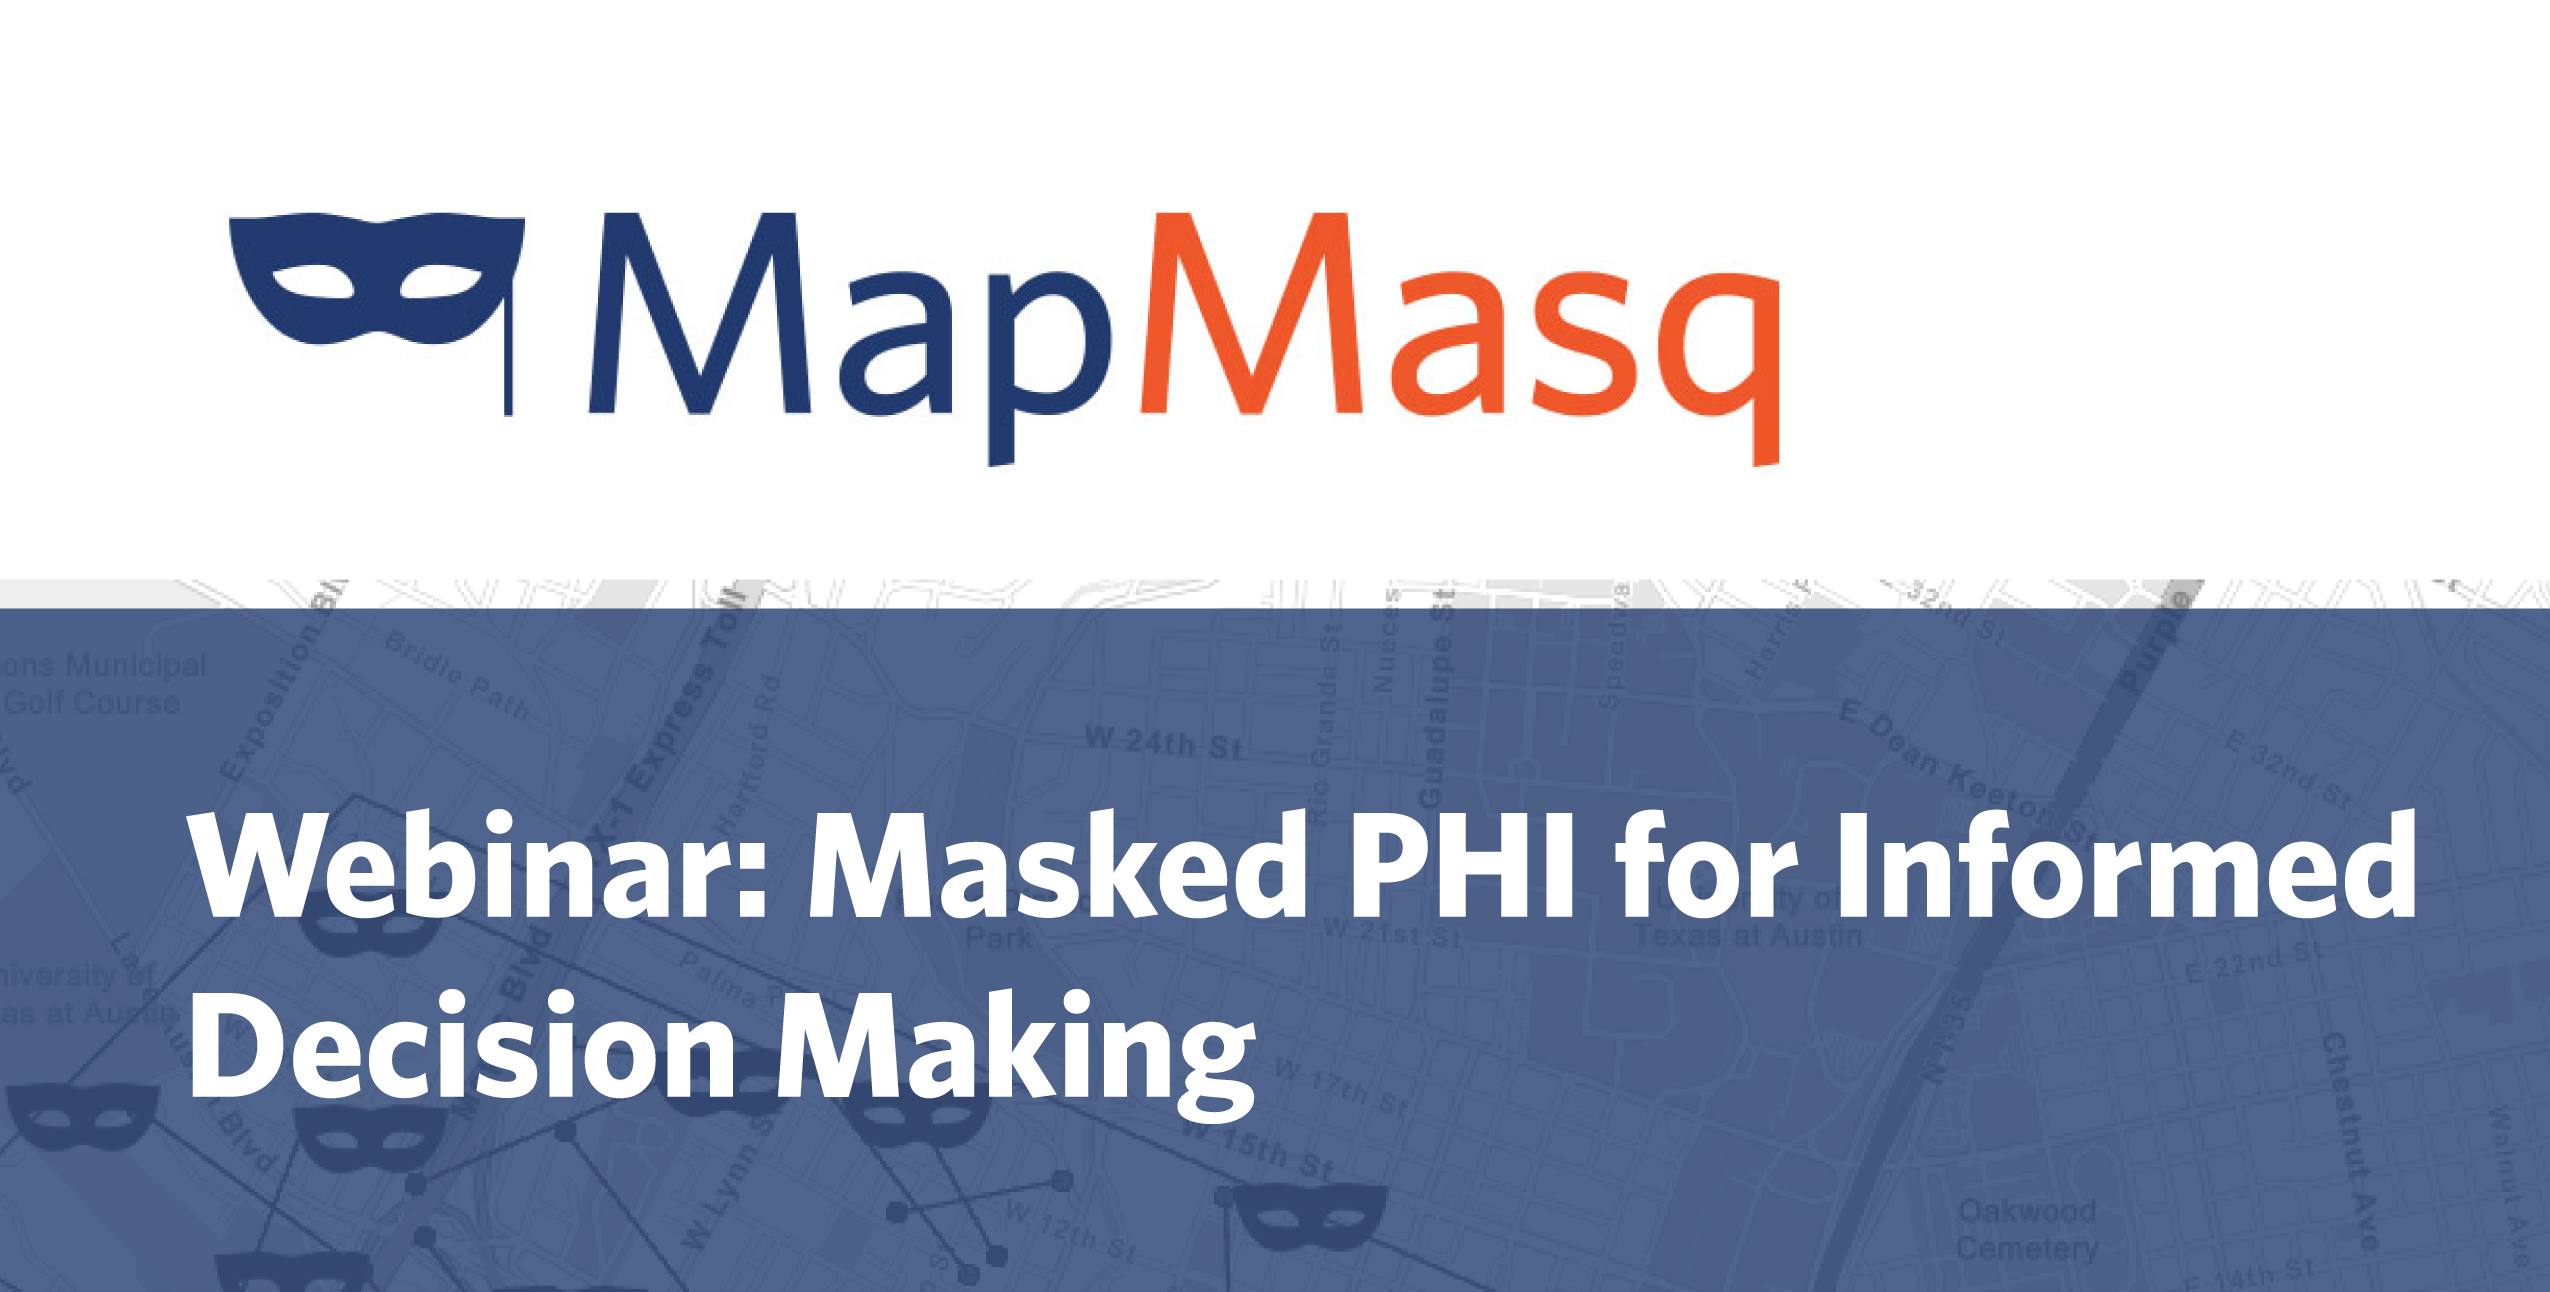 Geomasked PHI and PII for Informed Decision Making